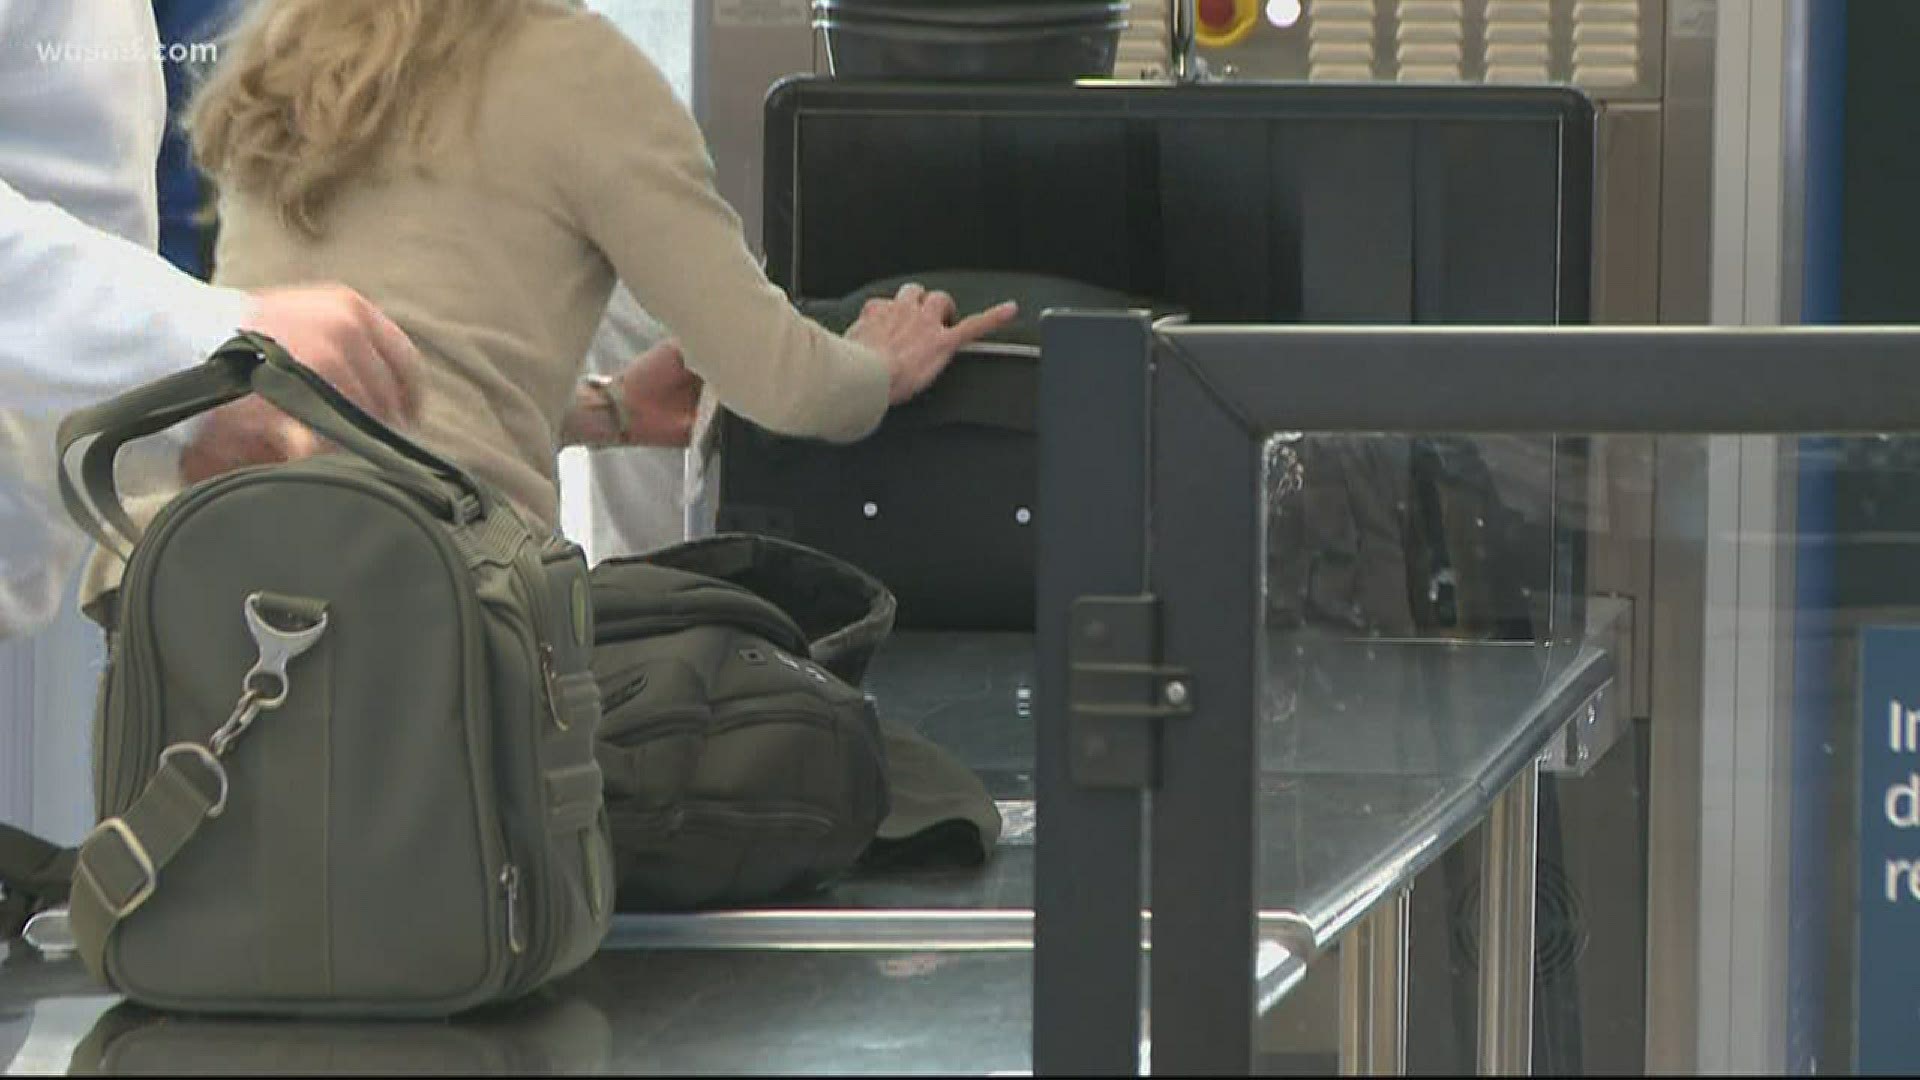 TSA shows a drop in numbers of travelers being screened. It was the lowest number in 10 years.